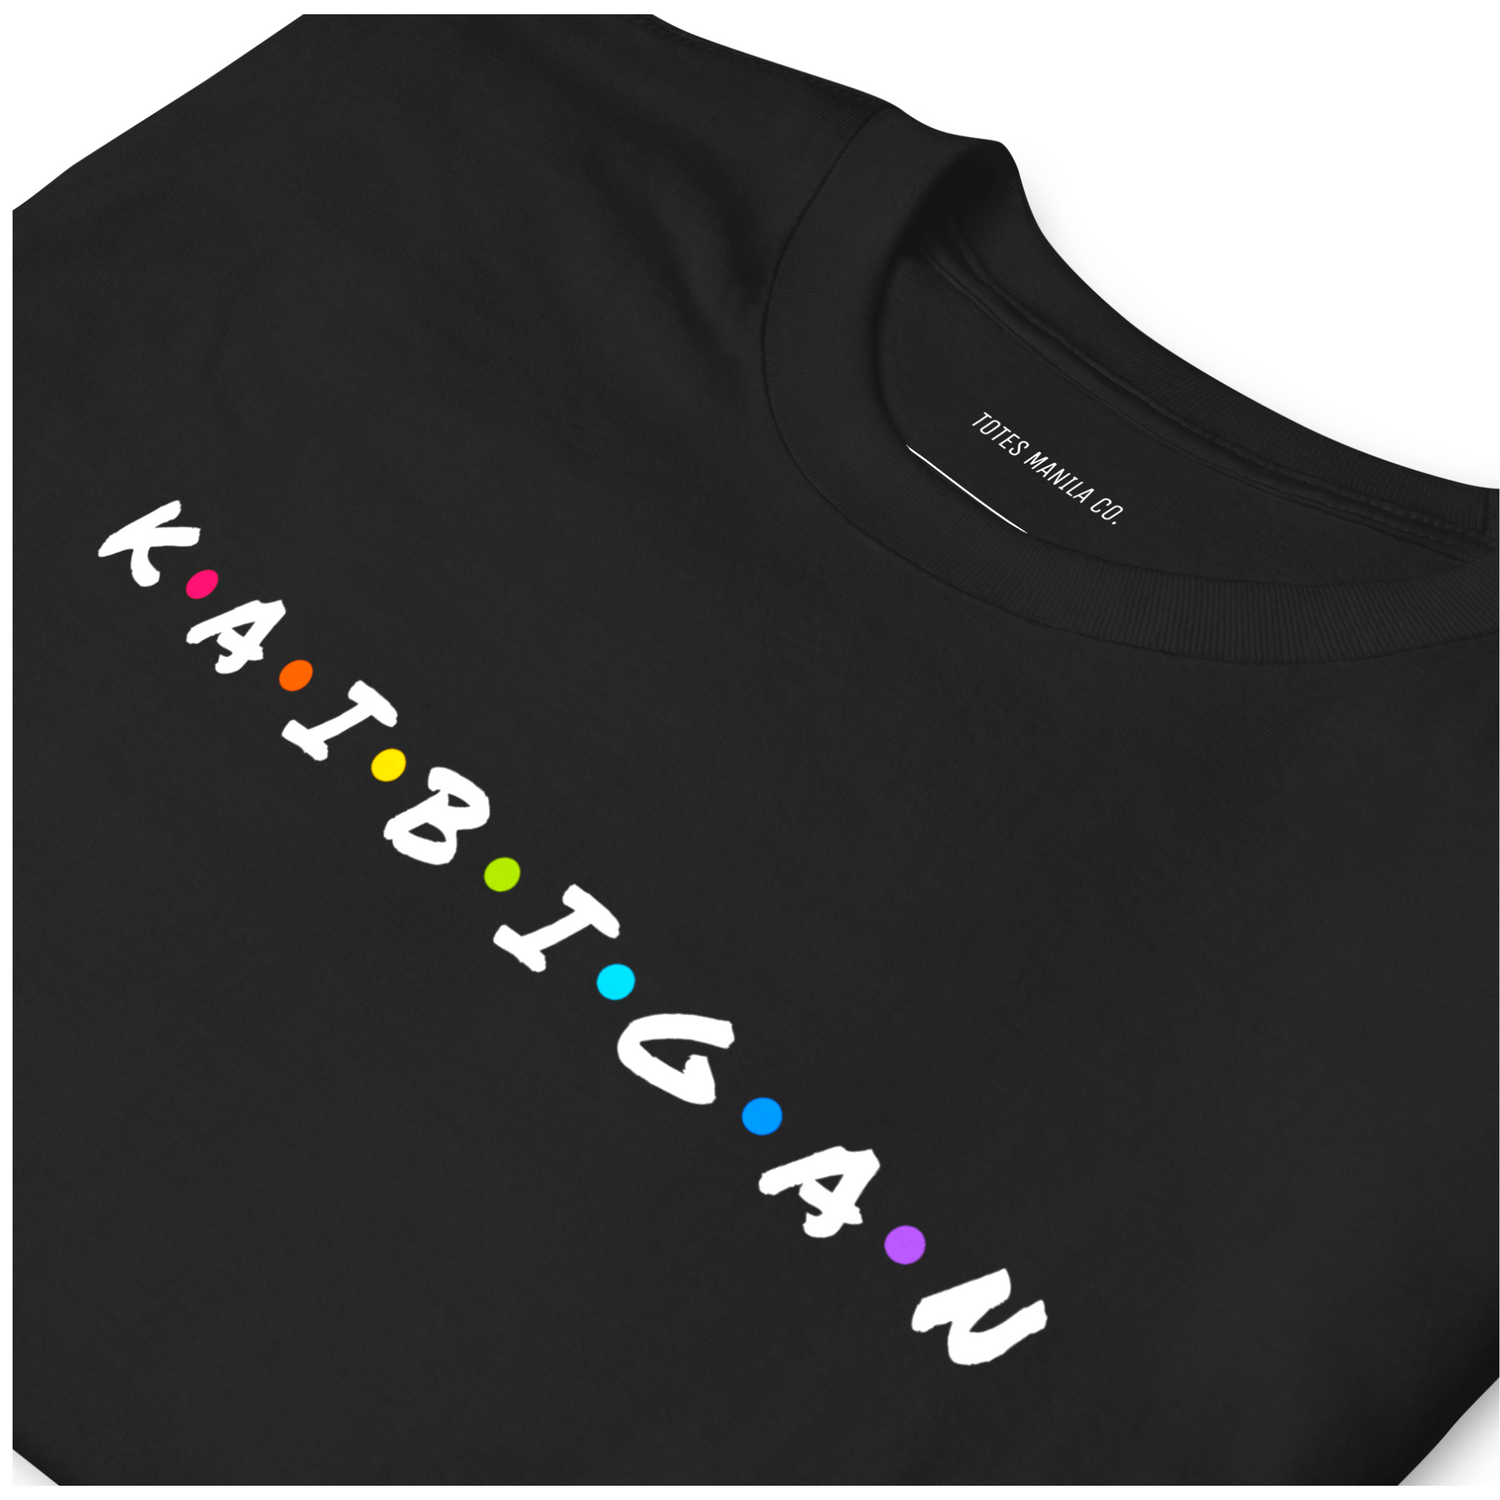 Close up of the Kaibigan design printed on a black unisex t-shirt.